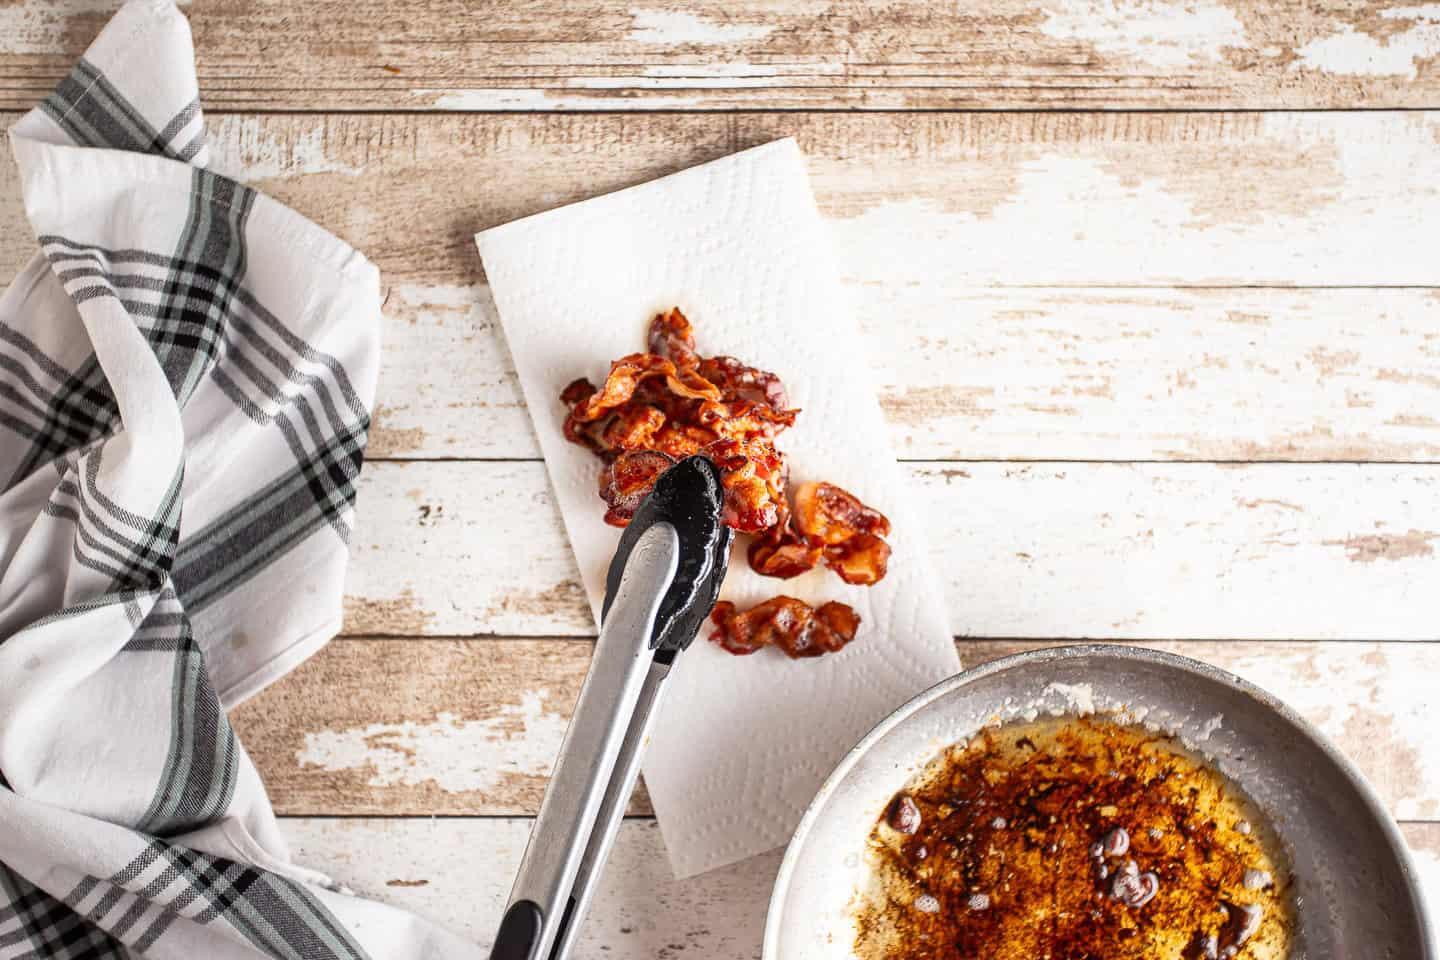 Removing cooked bacon from the pan and placing it on paper towels to drain.